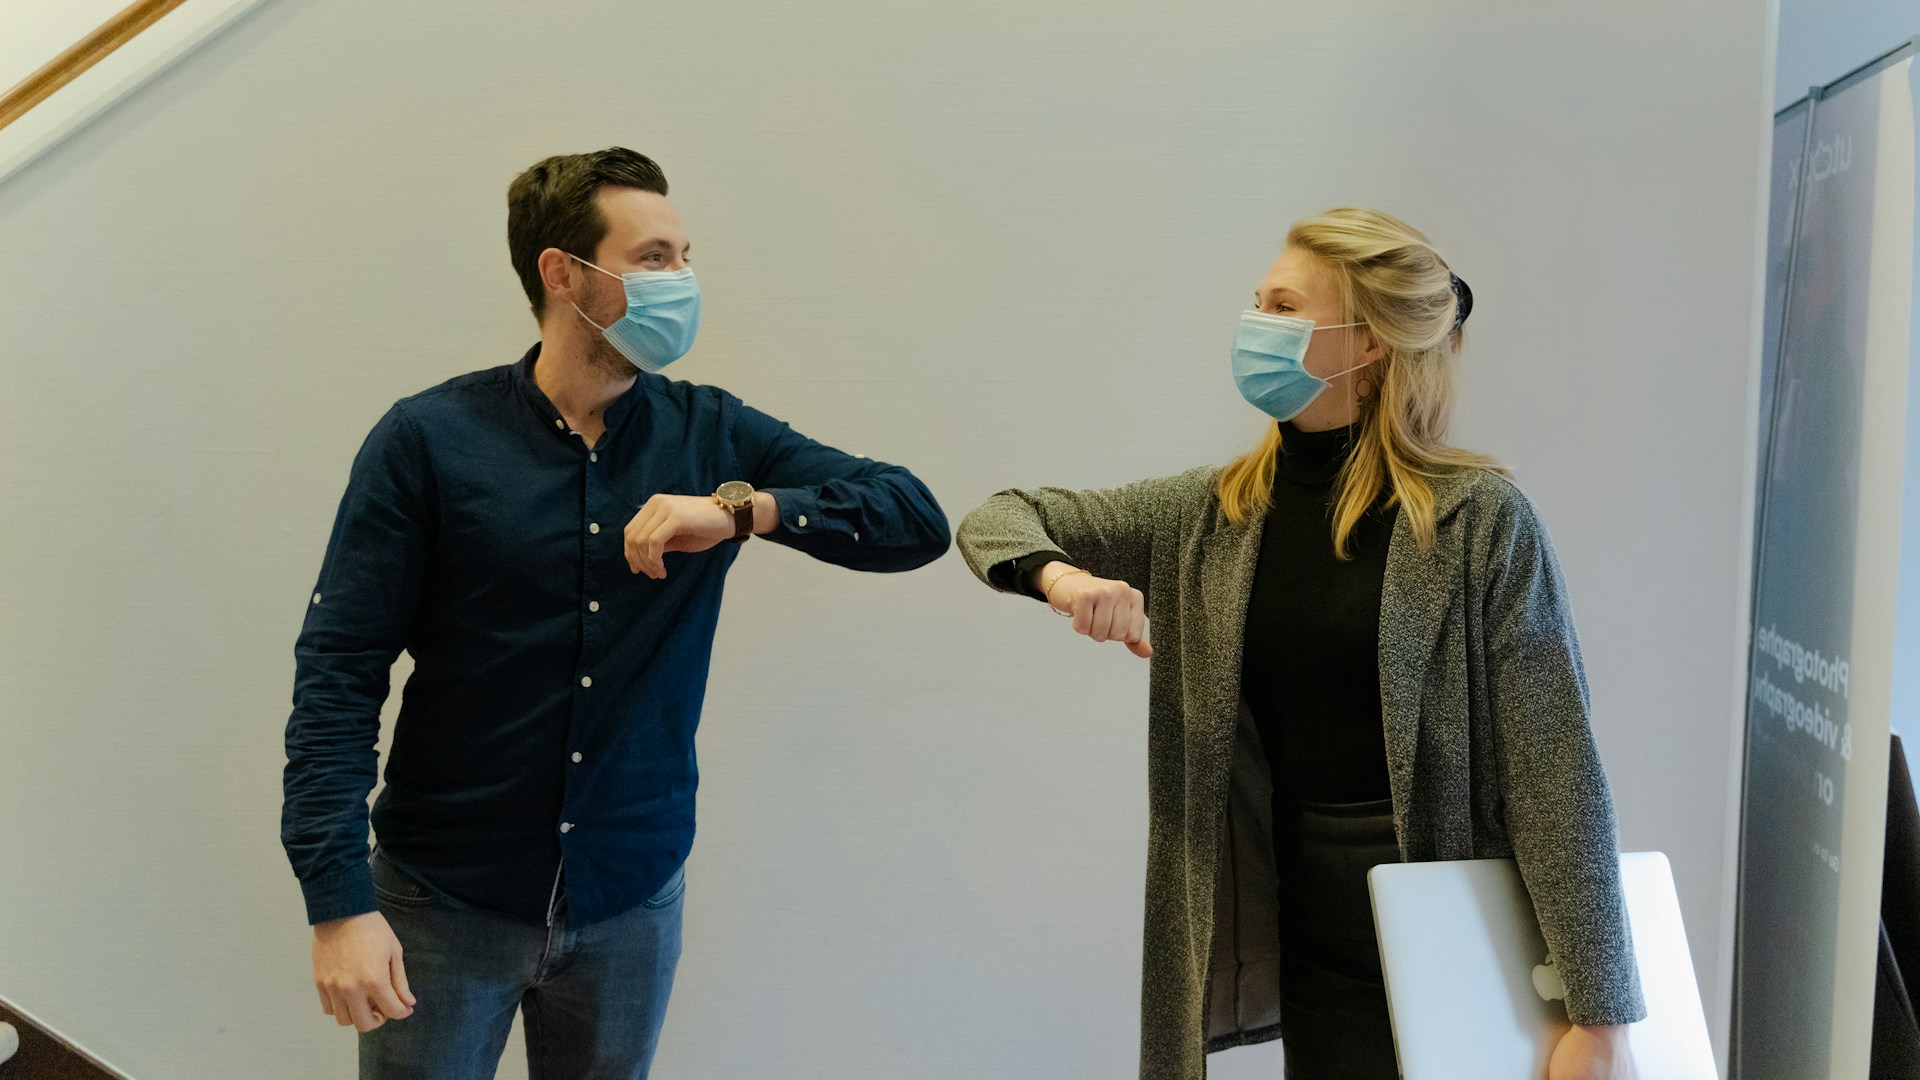 two people touching elbows during the pandemic